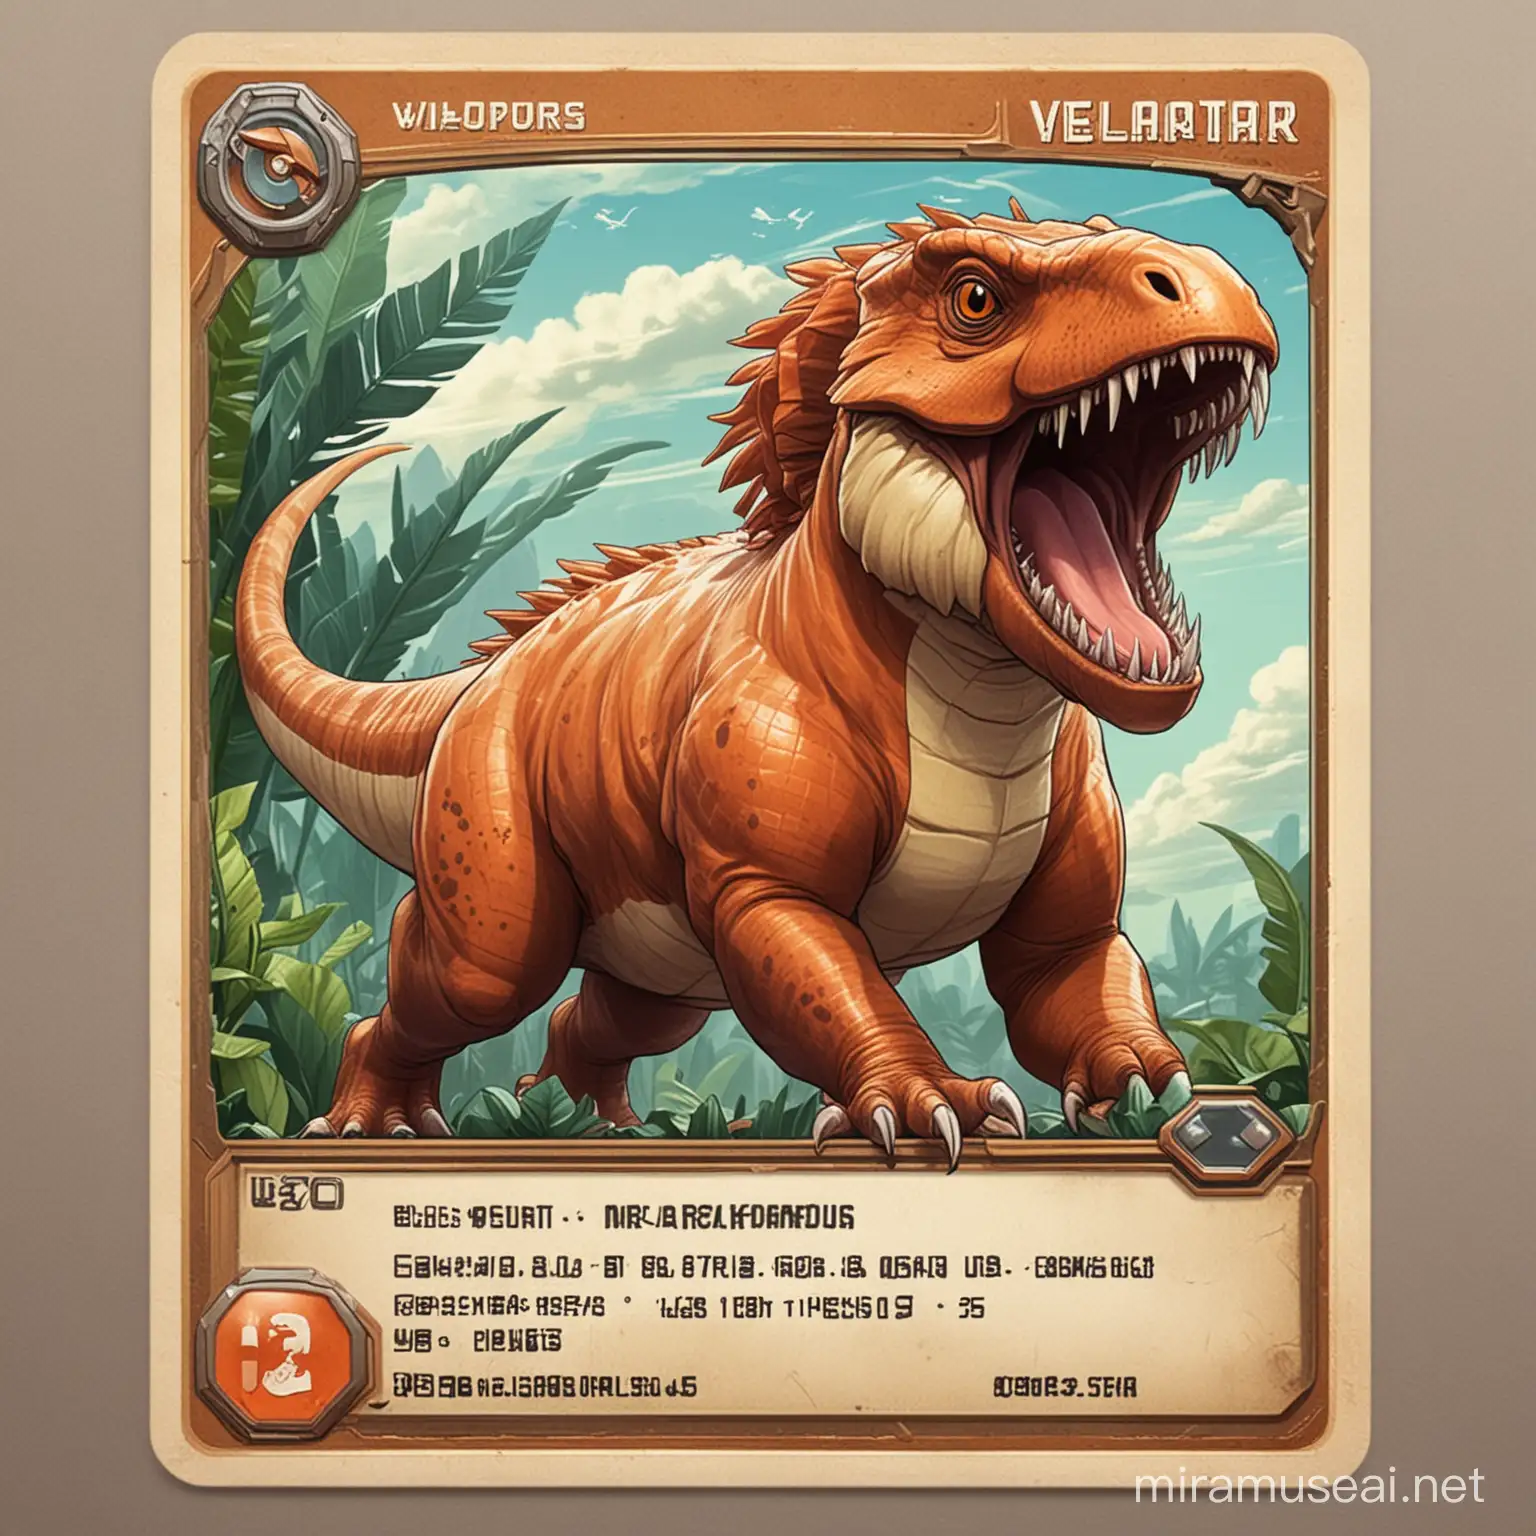 old trading card in the style of pokemon that shows a creature named "Velocilerus" that is part velociraptor and part walrus. use vibrant colors and include stats below image for "Power" and "Speed". only show the front of the card with nothing in the background.